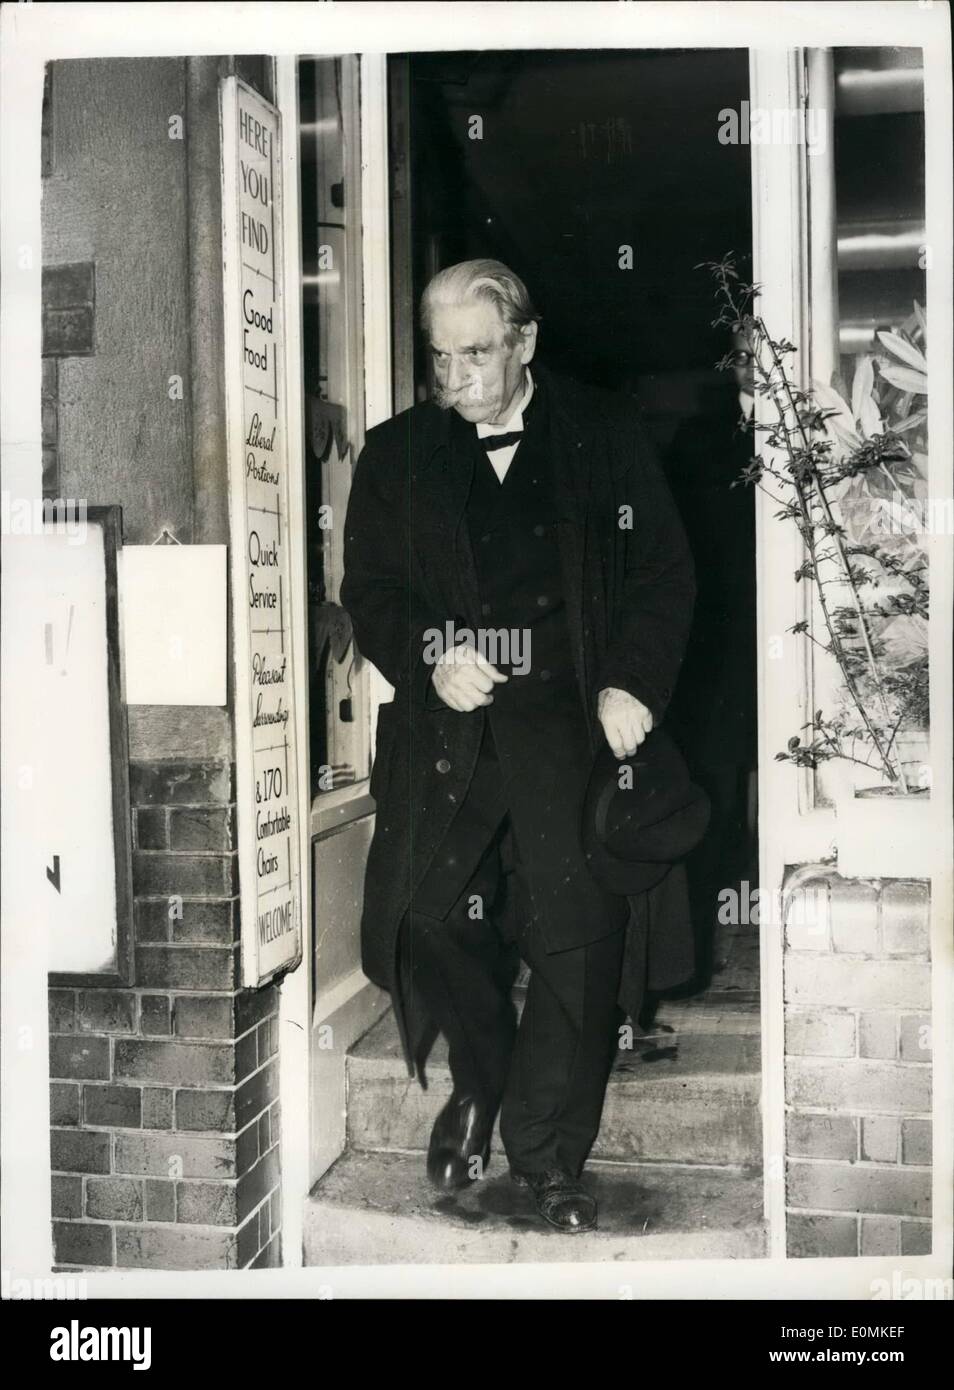 Oct. 10, 1955 - Dr. Albert Schweitzer goes to the palace. Receives the hon O.B.E. Dr Albert Schweitzer who renounced fame and fortune as a musician 43 years ago to from a leper colony at Lambarene - visited Buckingham palace this mrongin where he was invested with the honorary order of merit by H.M. The Queen, Dr. Schweitzer was hailed as the world's greatest organist forty years ago. photo shows Dr. Albert Schweitzer seen as he let the Westminster tea-shop of Swiss restaurant friend Mr. Emile Metter - where he is staying for the palace this morning. Stock Photo